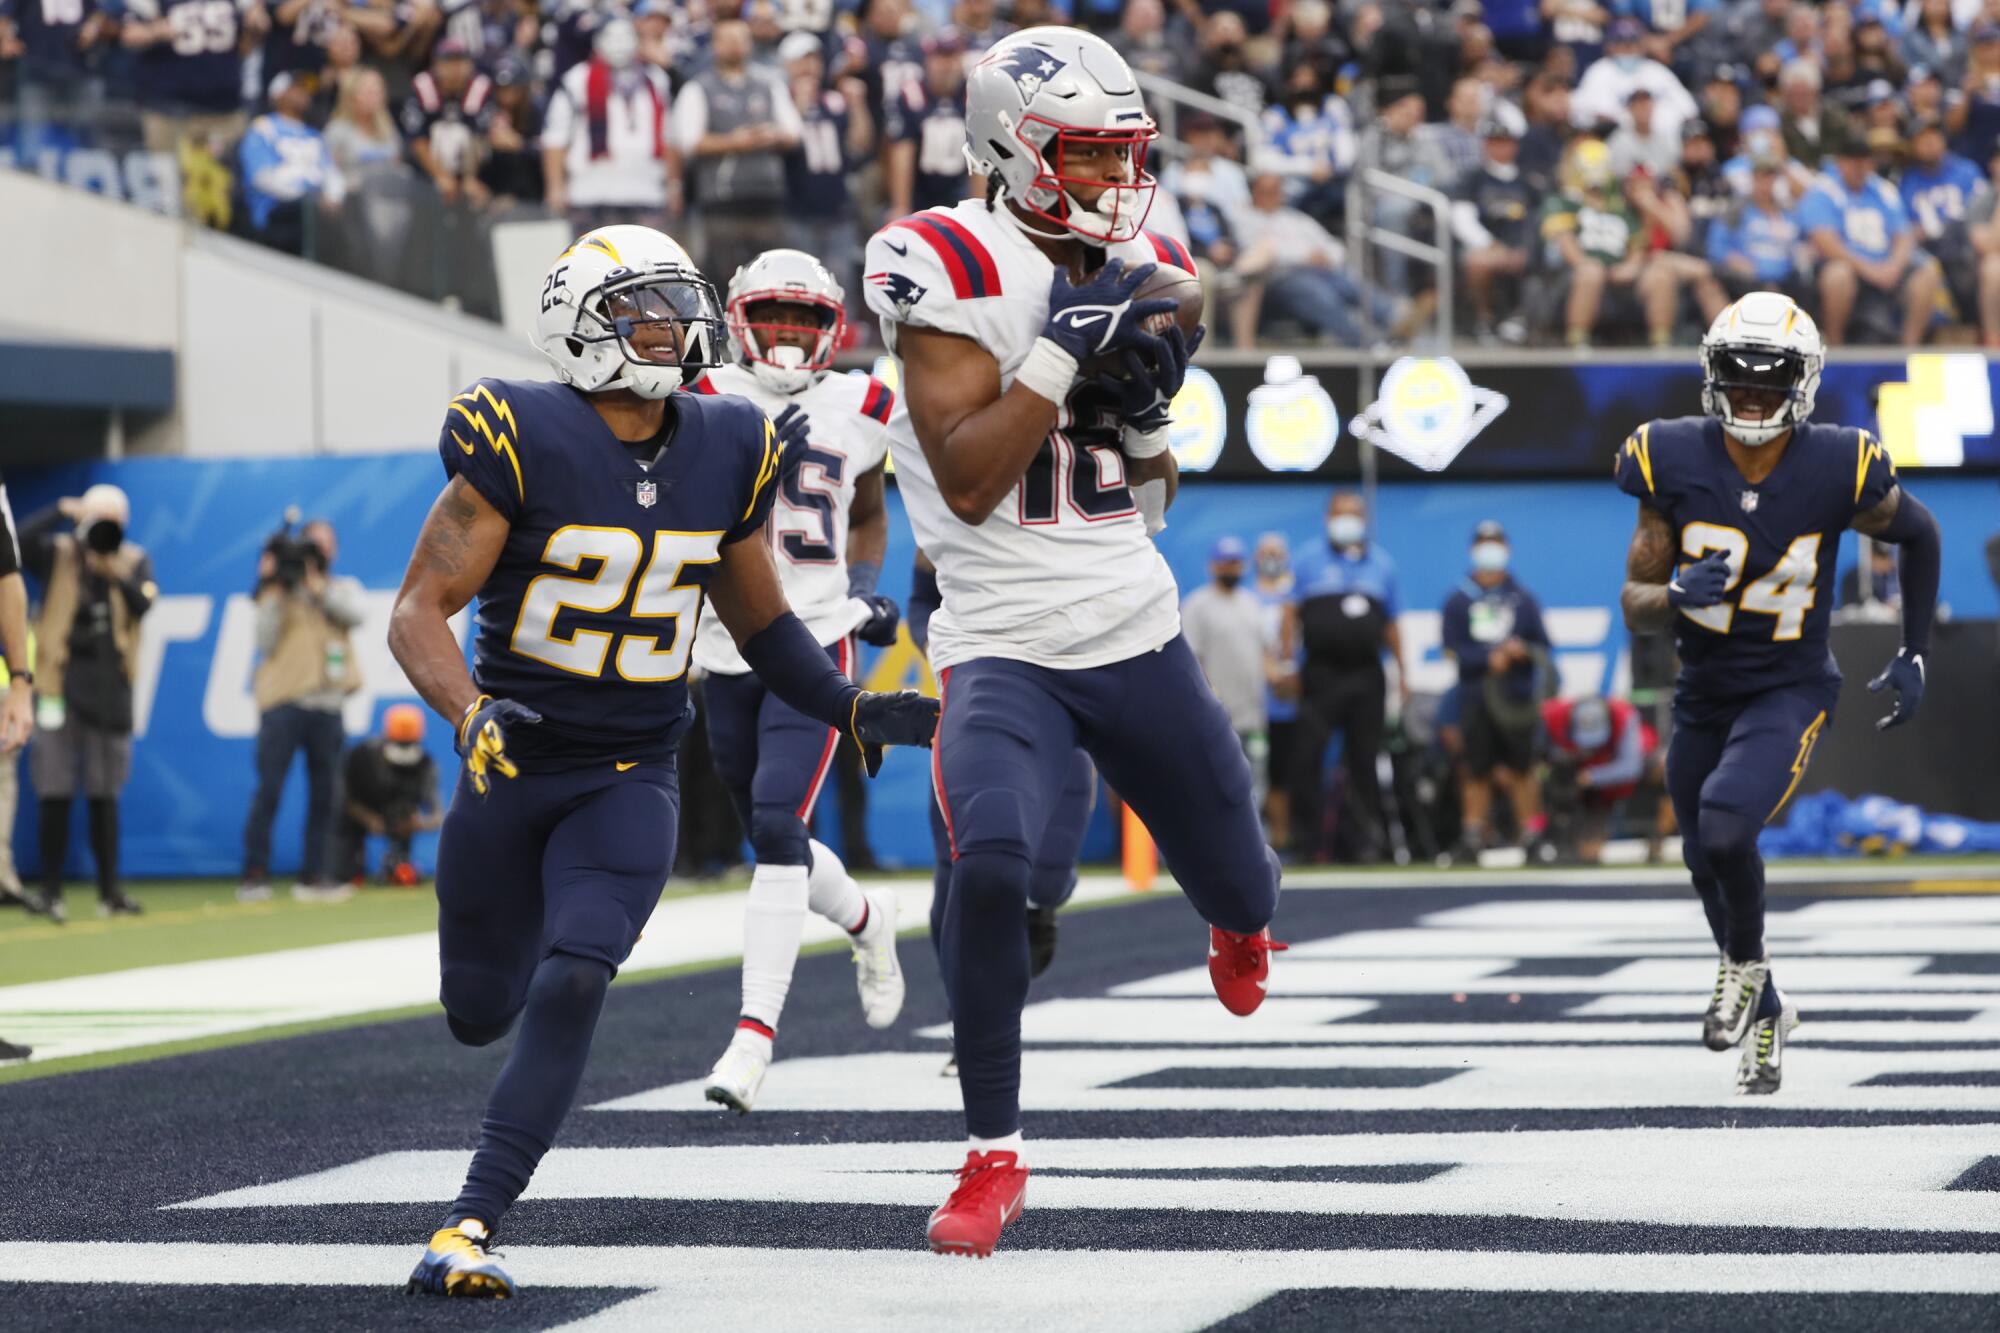 New England Patriots wide receiver Jakobi Meyers hauls in a pass for a two-point conversion.